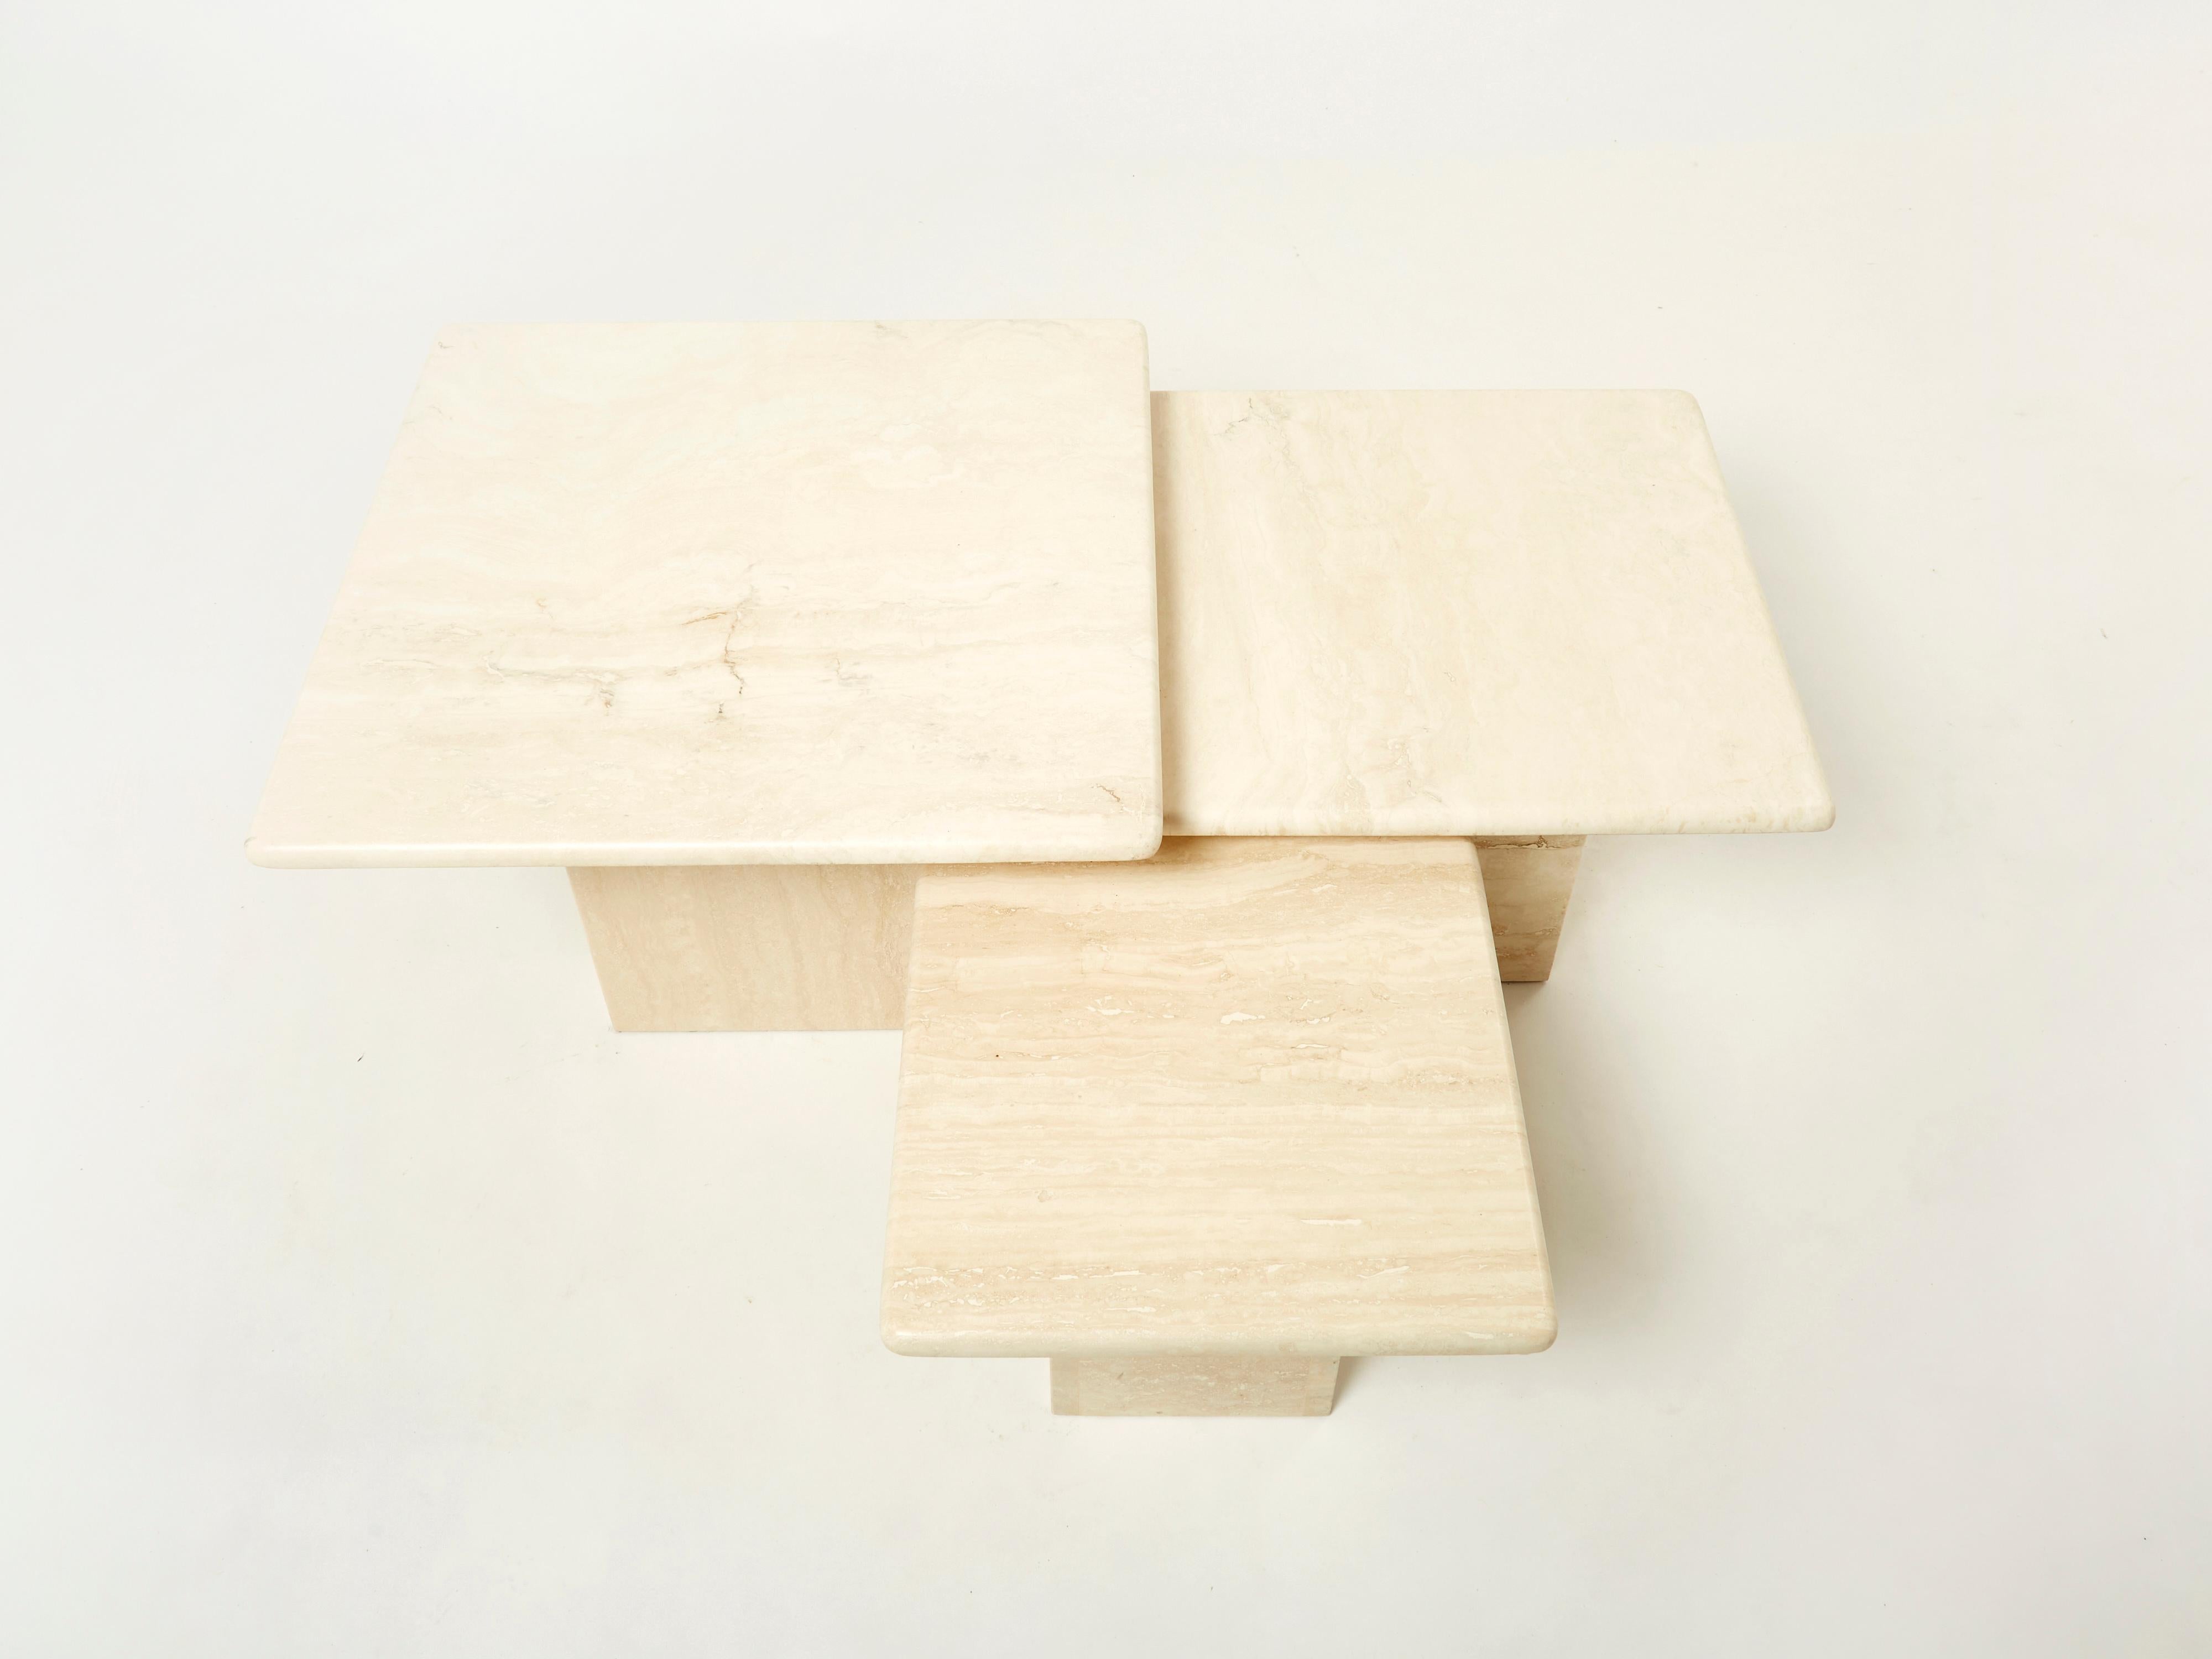 French Italian Nesting Tables Made of Travertine, 1970s